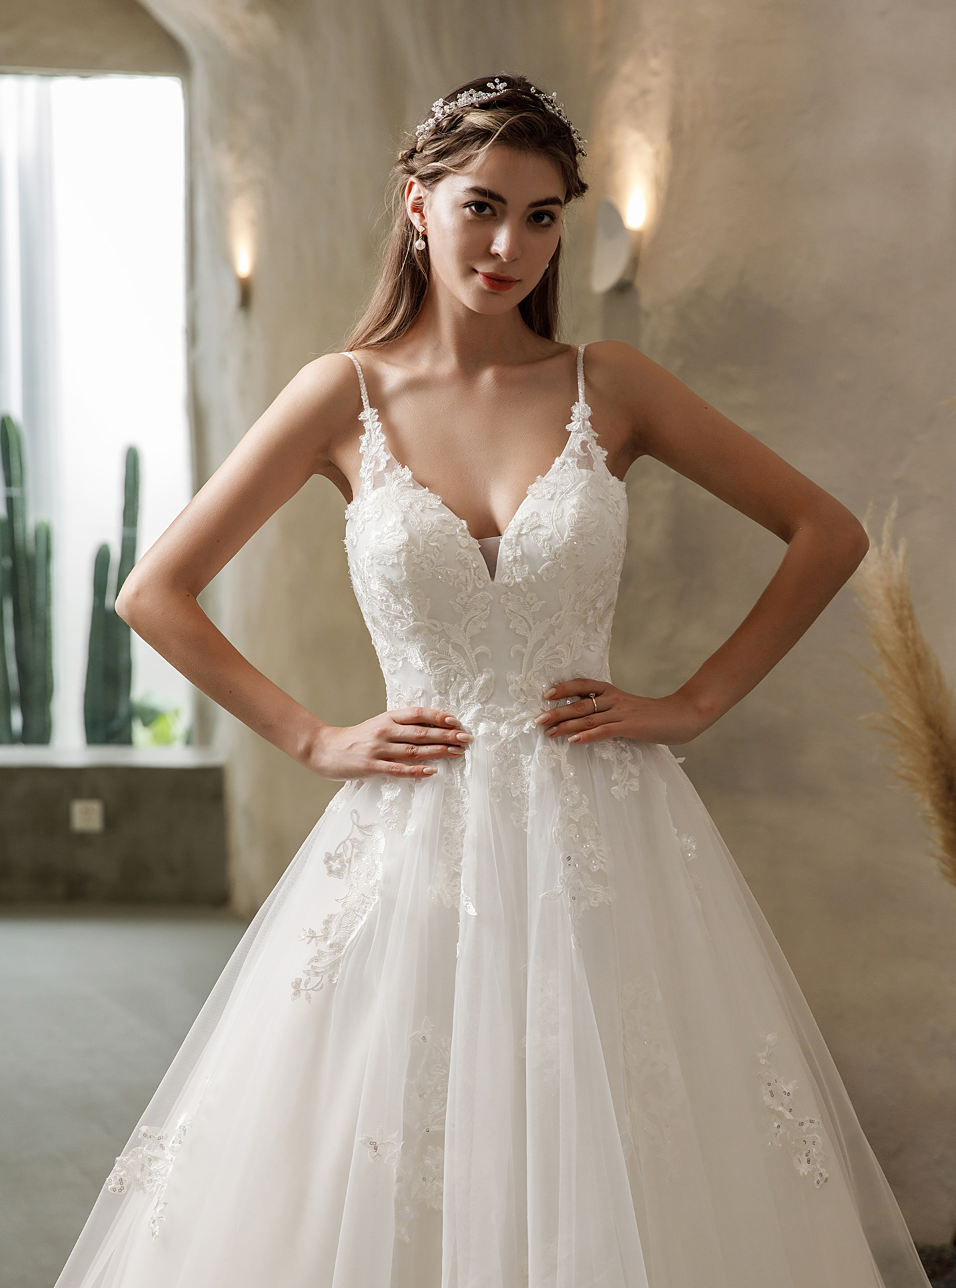 Ethereal Floral Lace Wedding Dress with Tiered Tulle Skirt